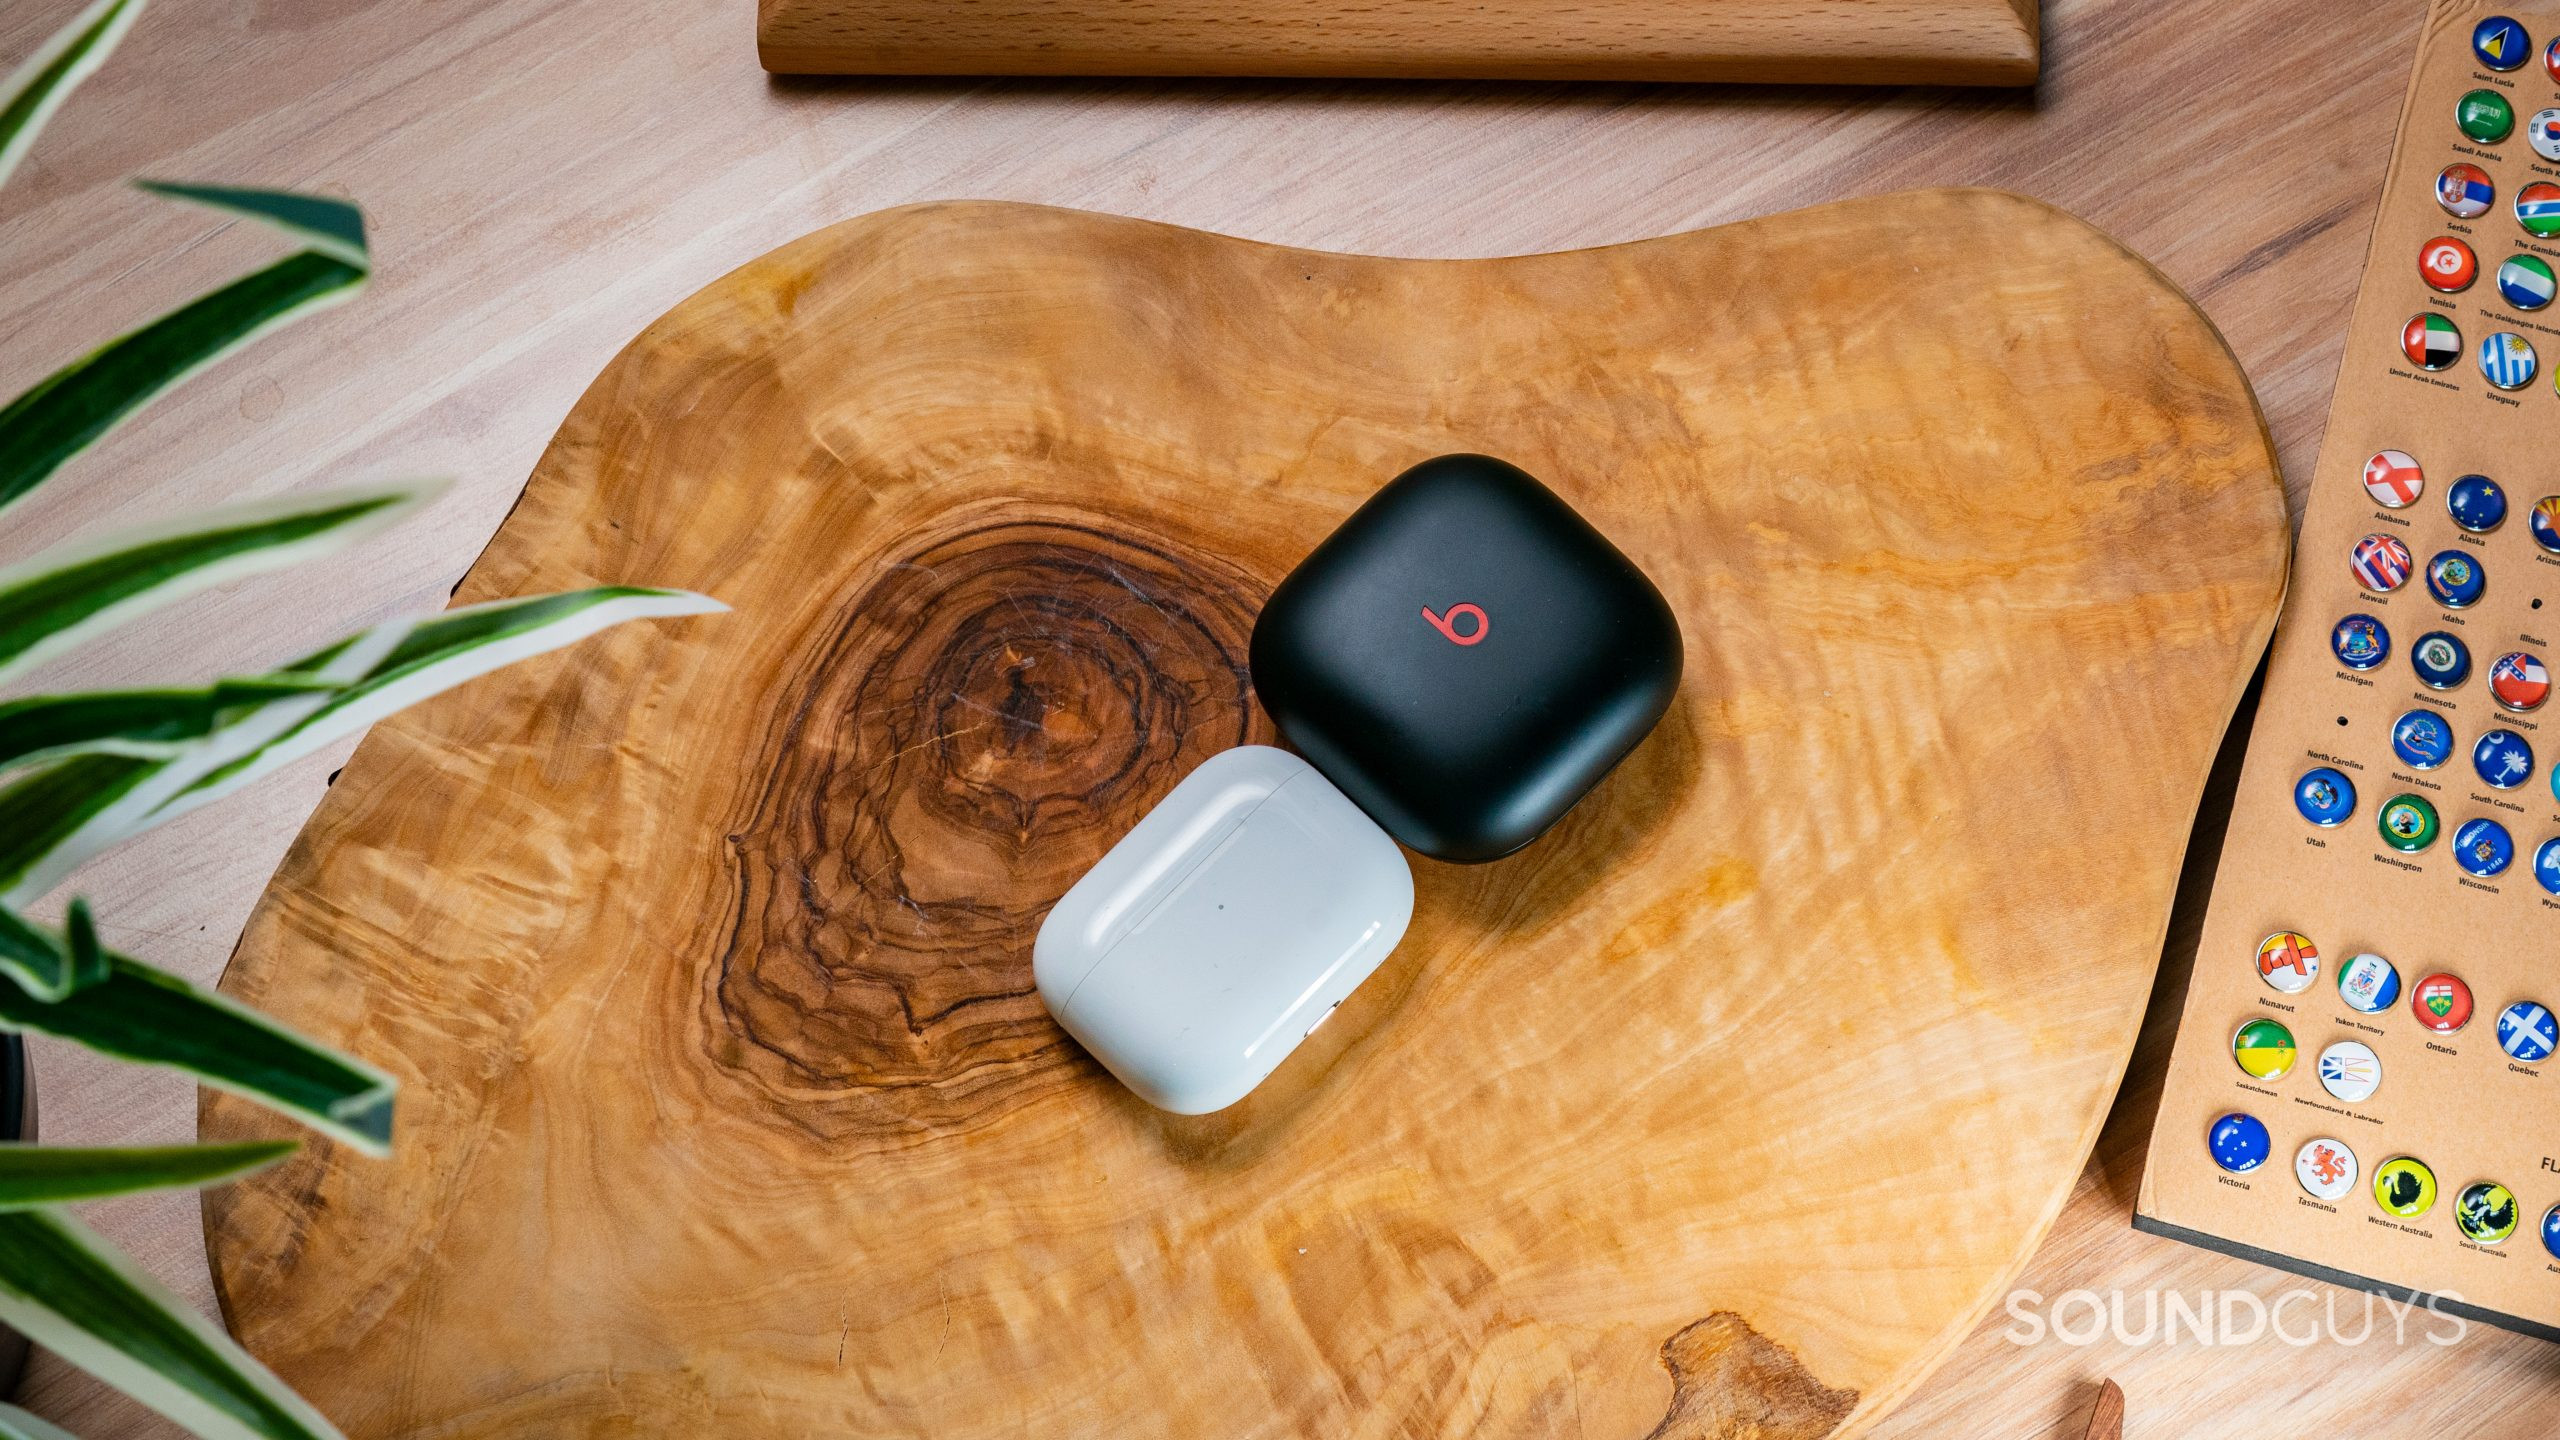 The cases of the AirPods Pro (2nd generation) and Beats Fit Pro beside each other on a wooden surface.